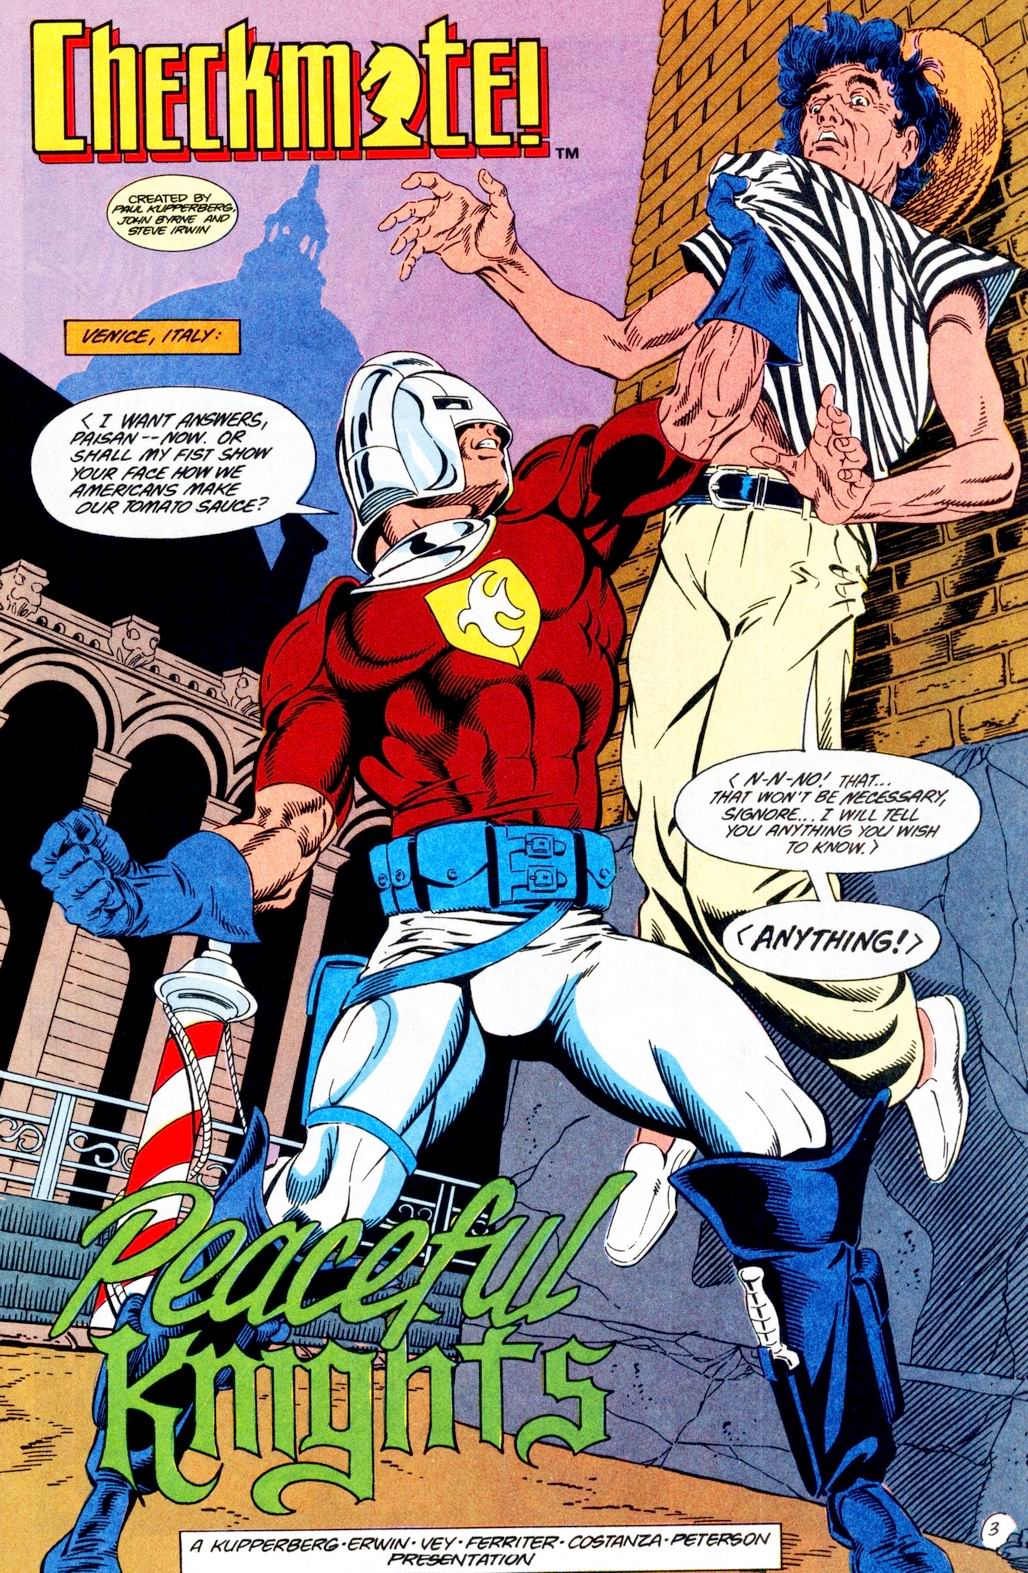 Read online Checkmate (1988) comic -  Issue #23 - 4